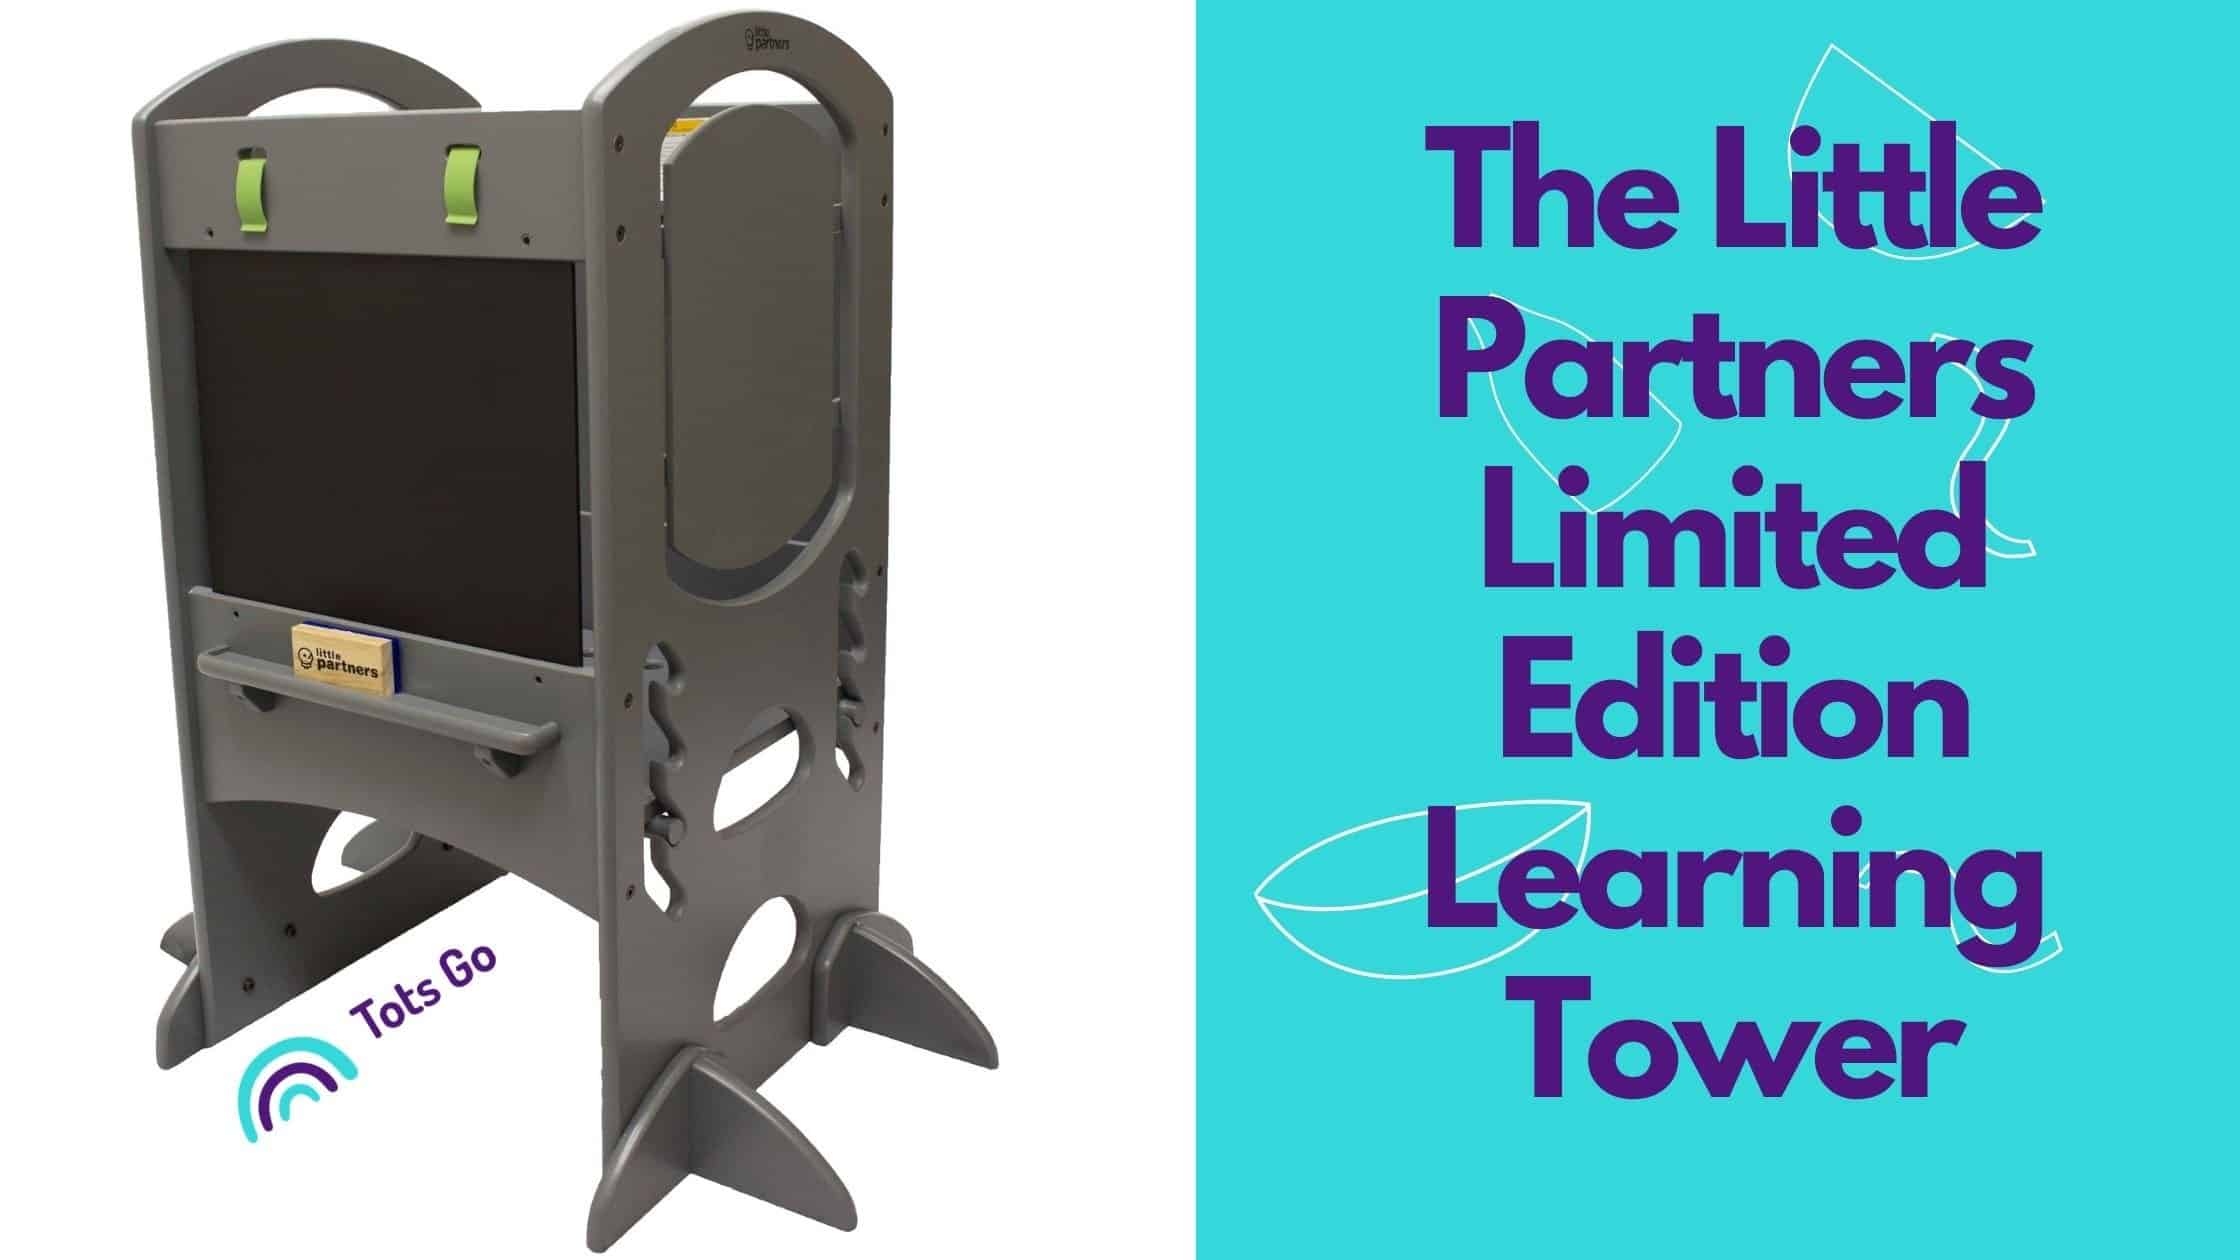 The Little Partners Limited Edition Learning Tower - A detailed review (1)